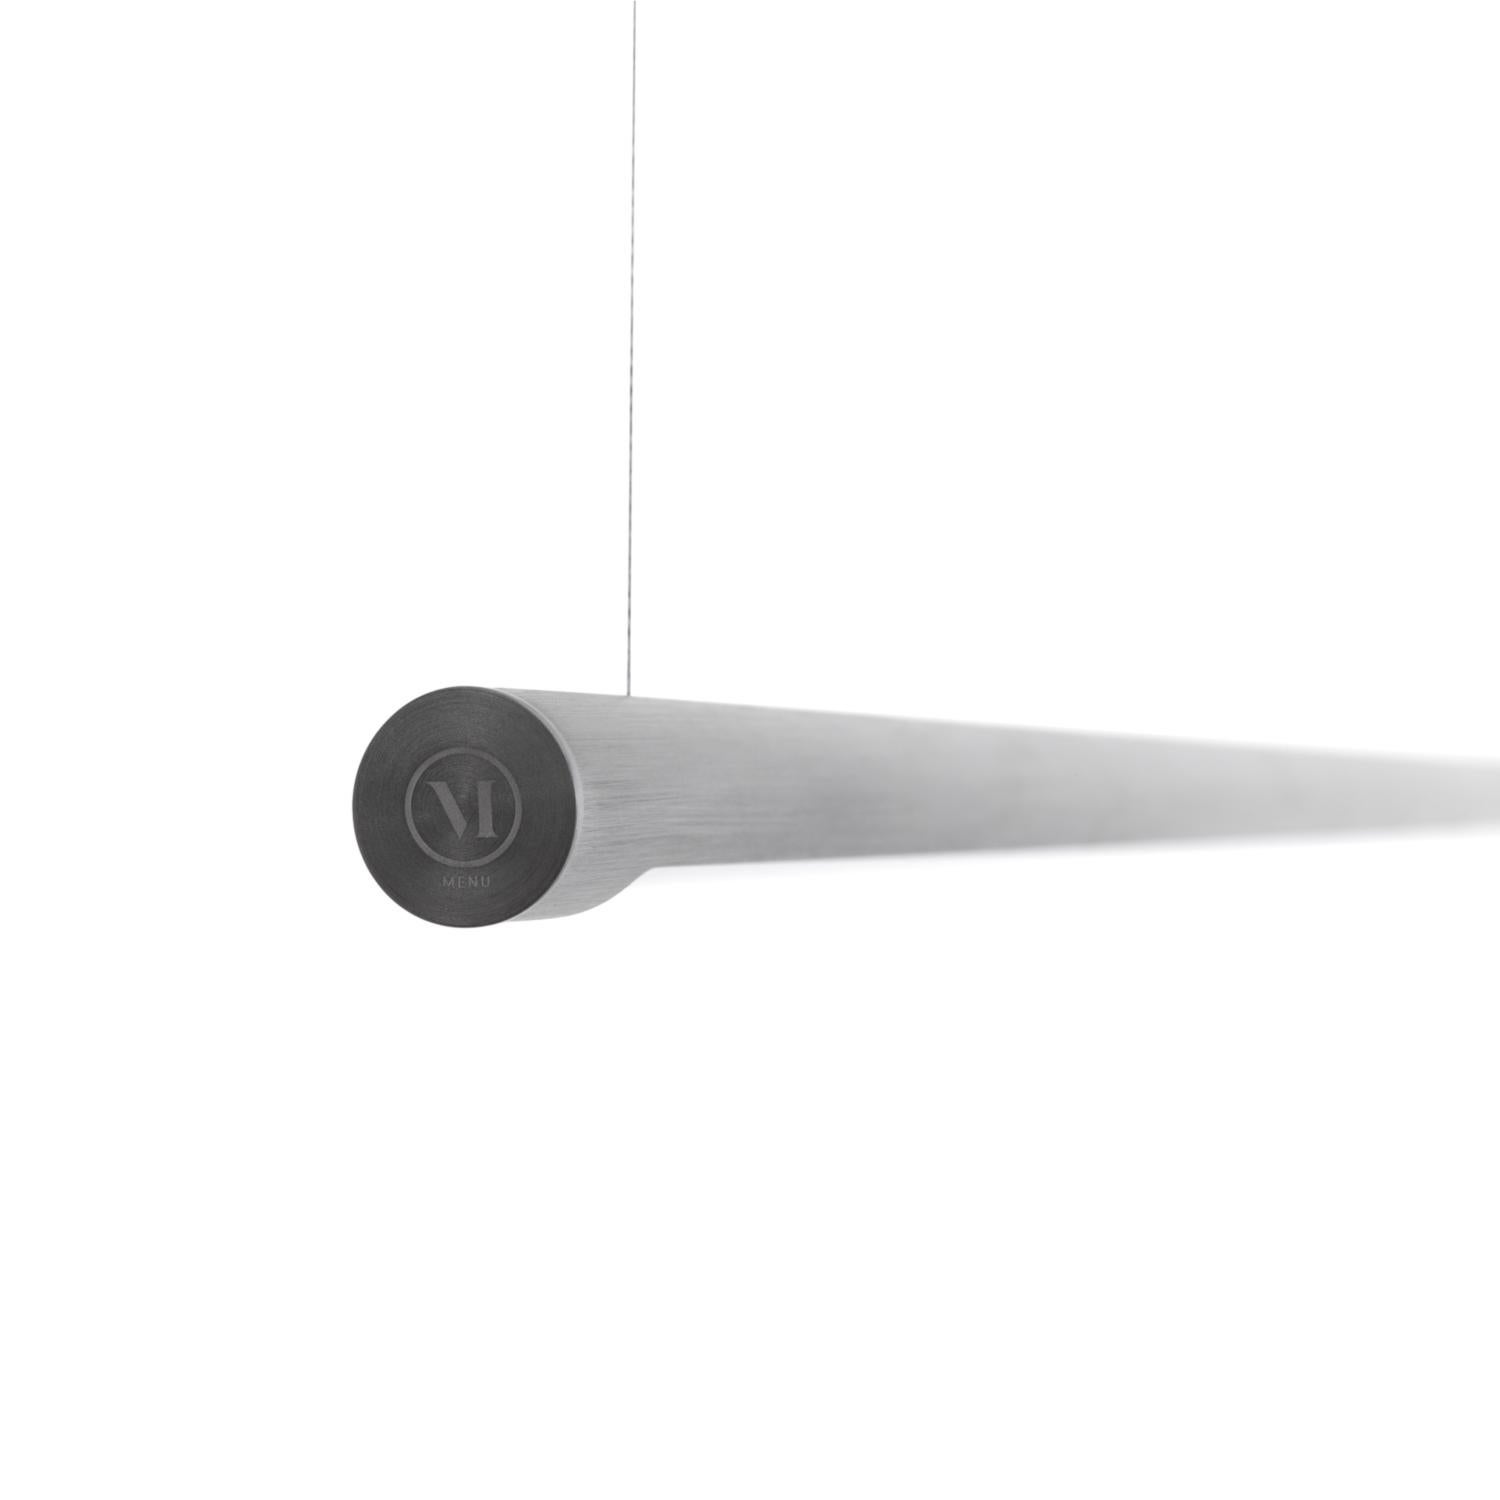 The new Task Pendant by Danish designer Gry Holmskov strikes a harmonious, breathtaking balance between function and aesthetics. It’s pure, linear form not only catches the eye but also serves a key purpose: to spread light in a way ideal for